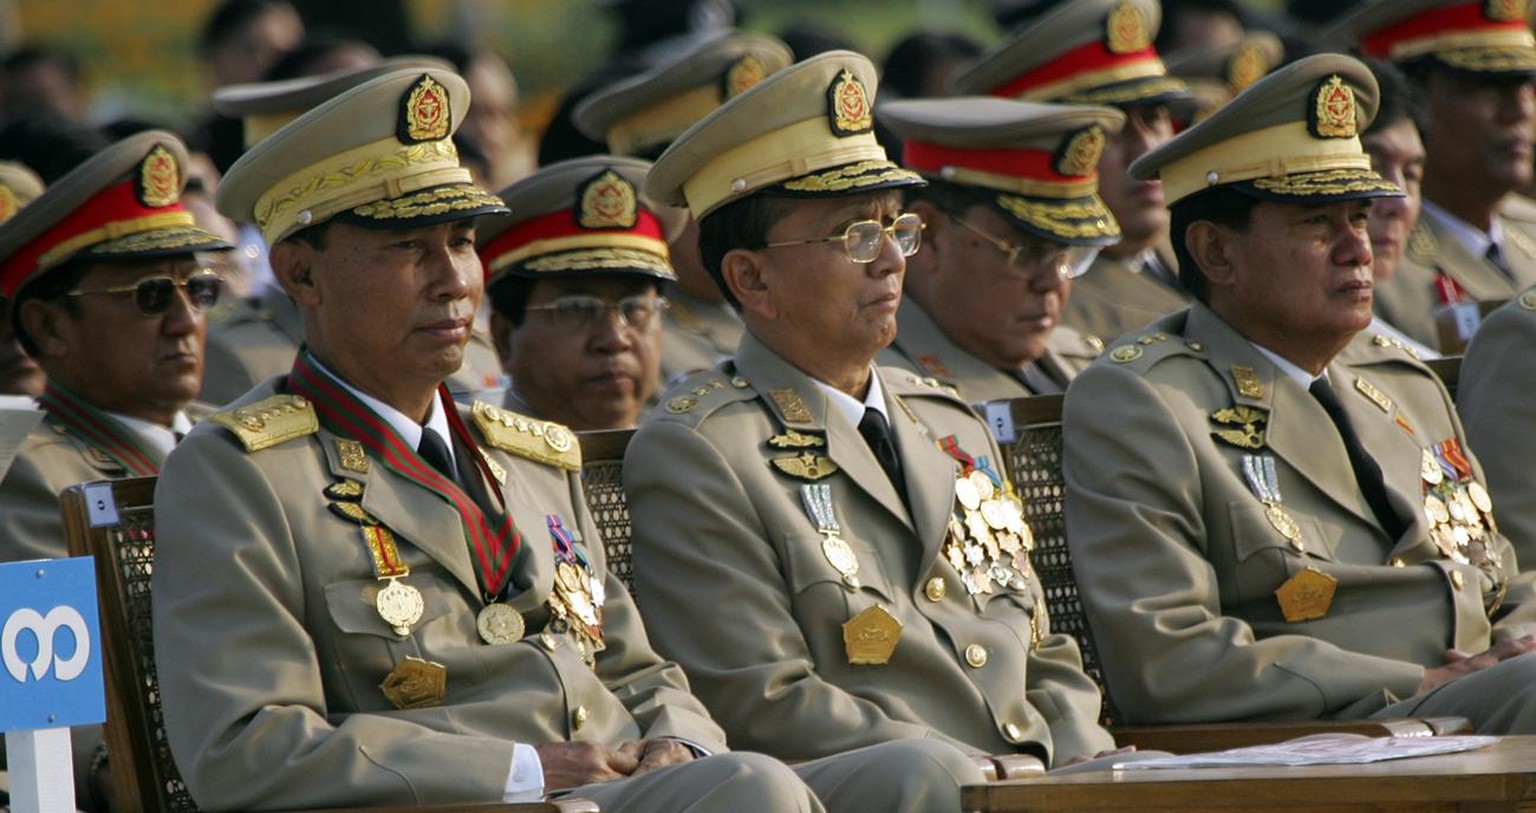 Myanmar junta leaders Gen. Thura Shwe, left, Lt. Gen. Thein Sein, center and Lt. Gen Kyaw Win, right, look on during 62nd annual Armed Forces Day ceremonies Tuesday, March 27, 2007, in the capital cit ...